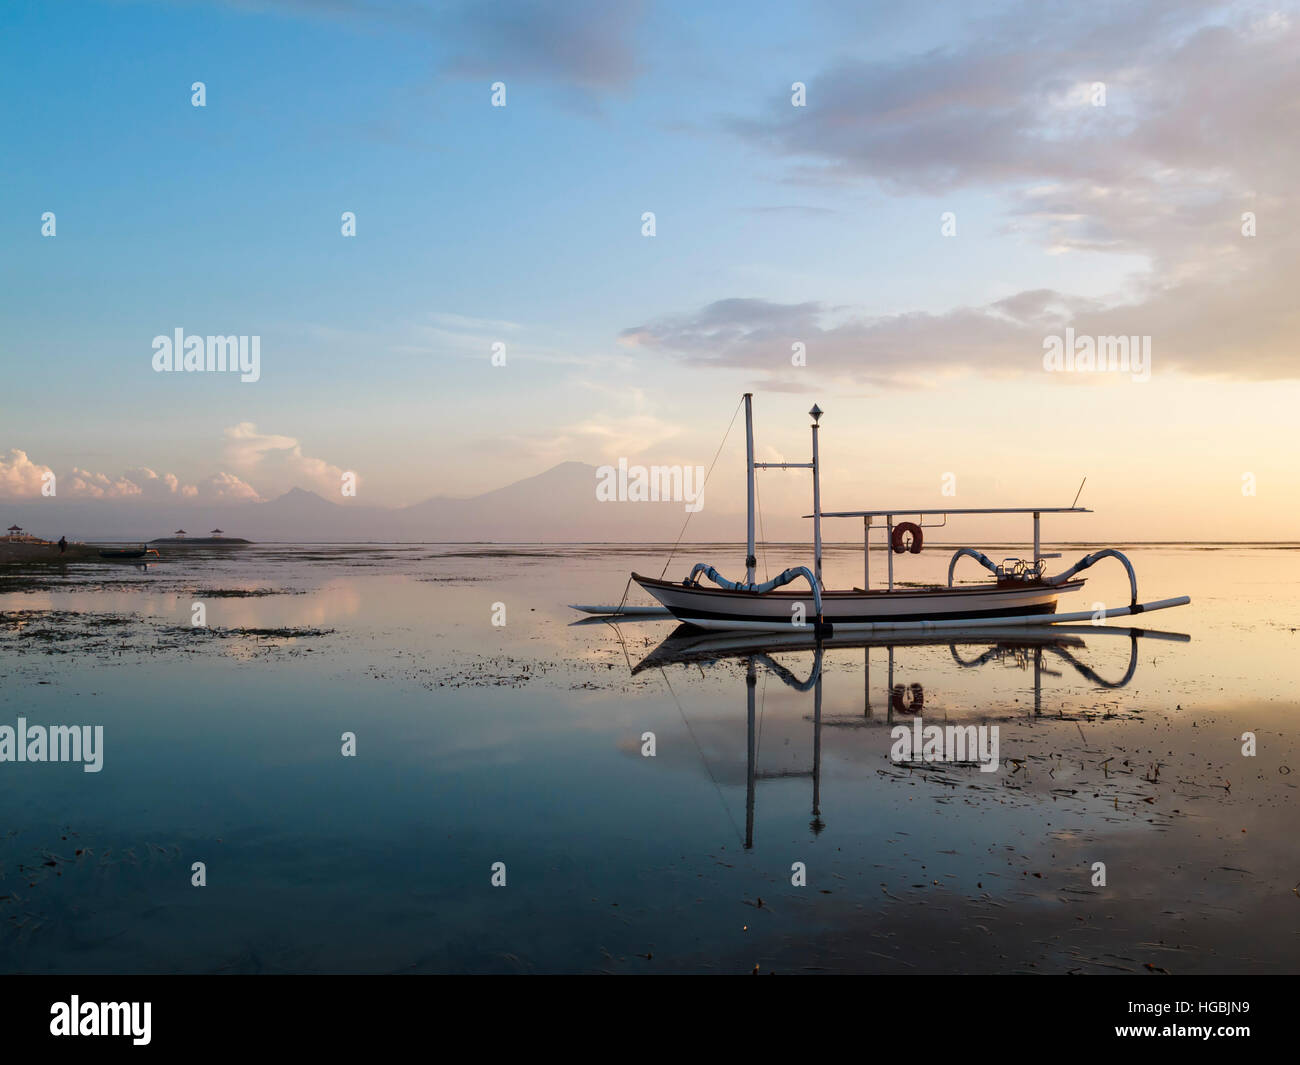 Bali traditional fishing boat reflected in the calm waters at sunset. Stock Photo